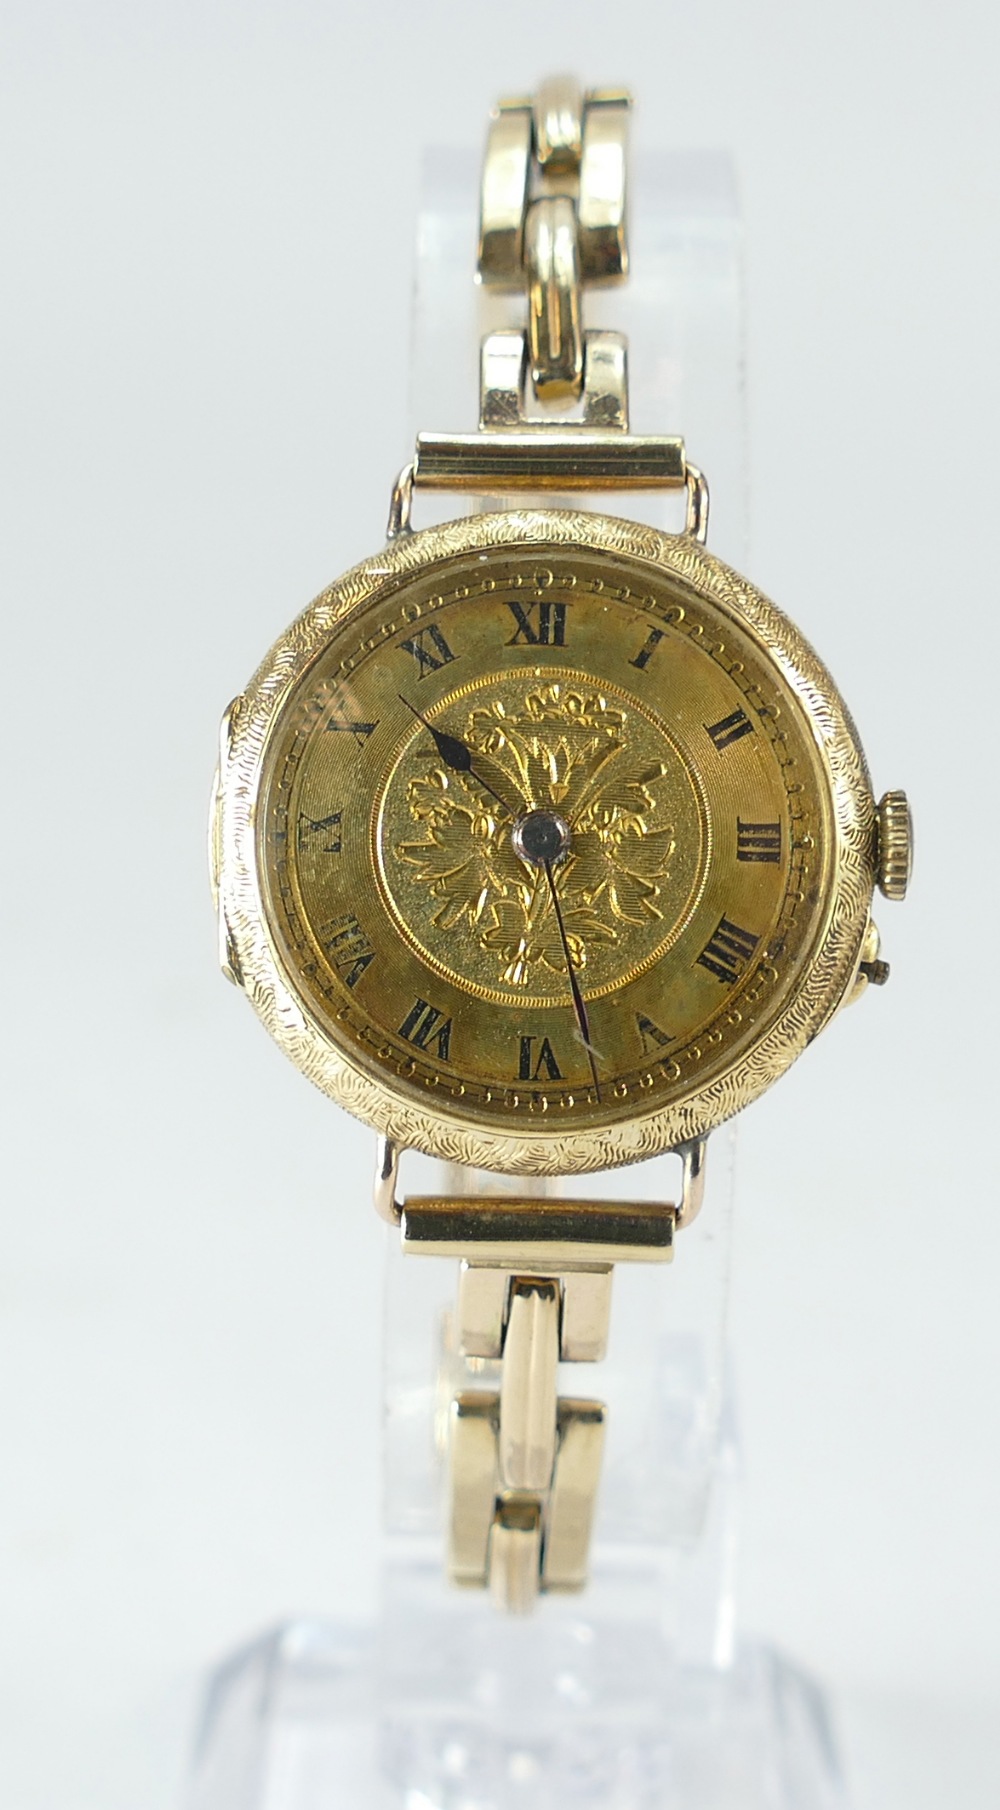 18ct Gold ladies Wristwatch (not working) on 9ct. gold expanding bracelet. 23.5g gross.